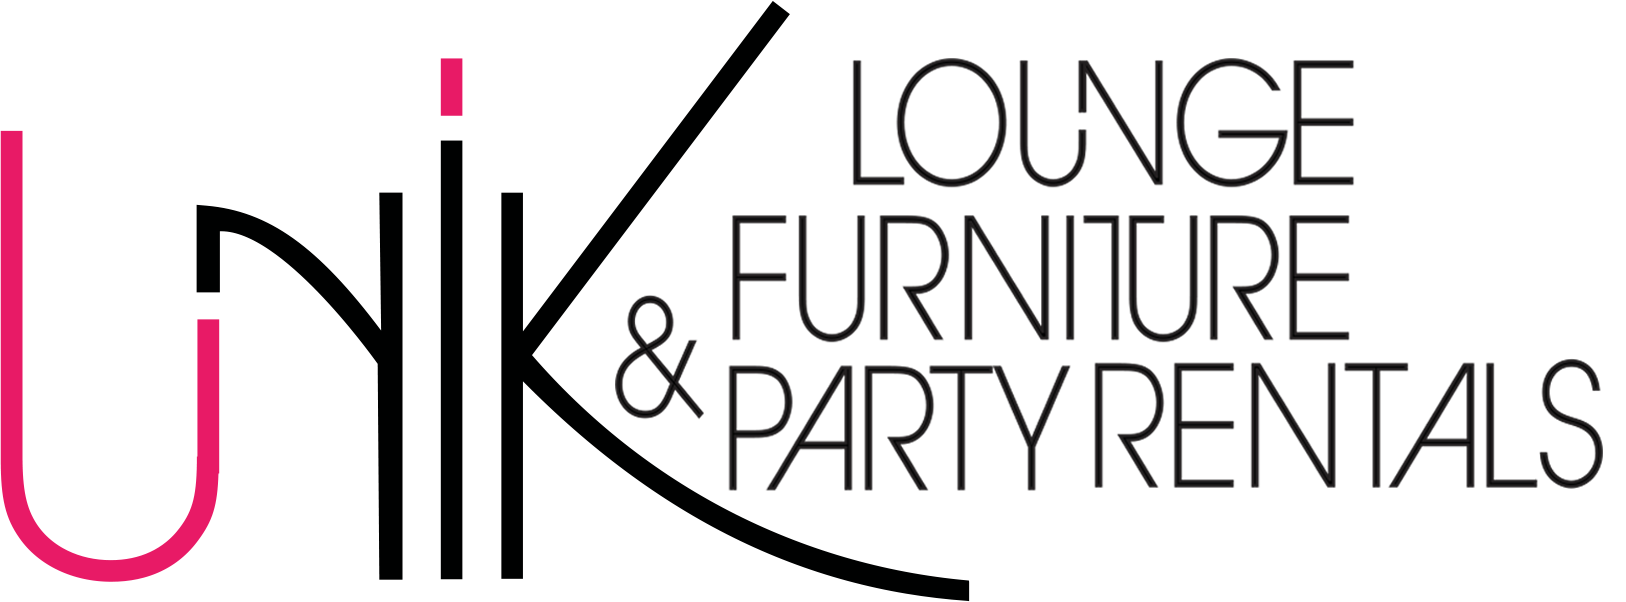 Unik Lounge Furniture and Party Rentals